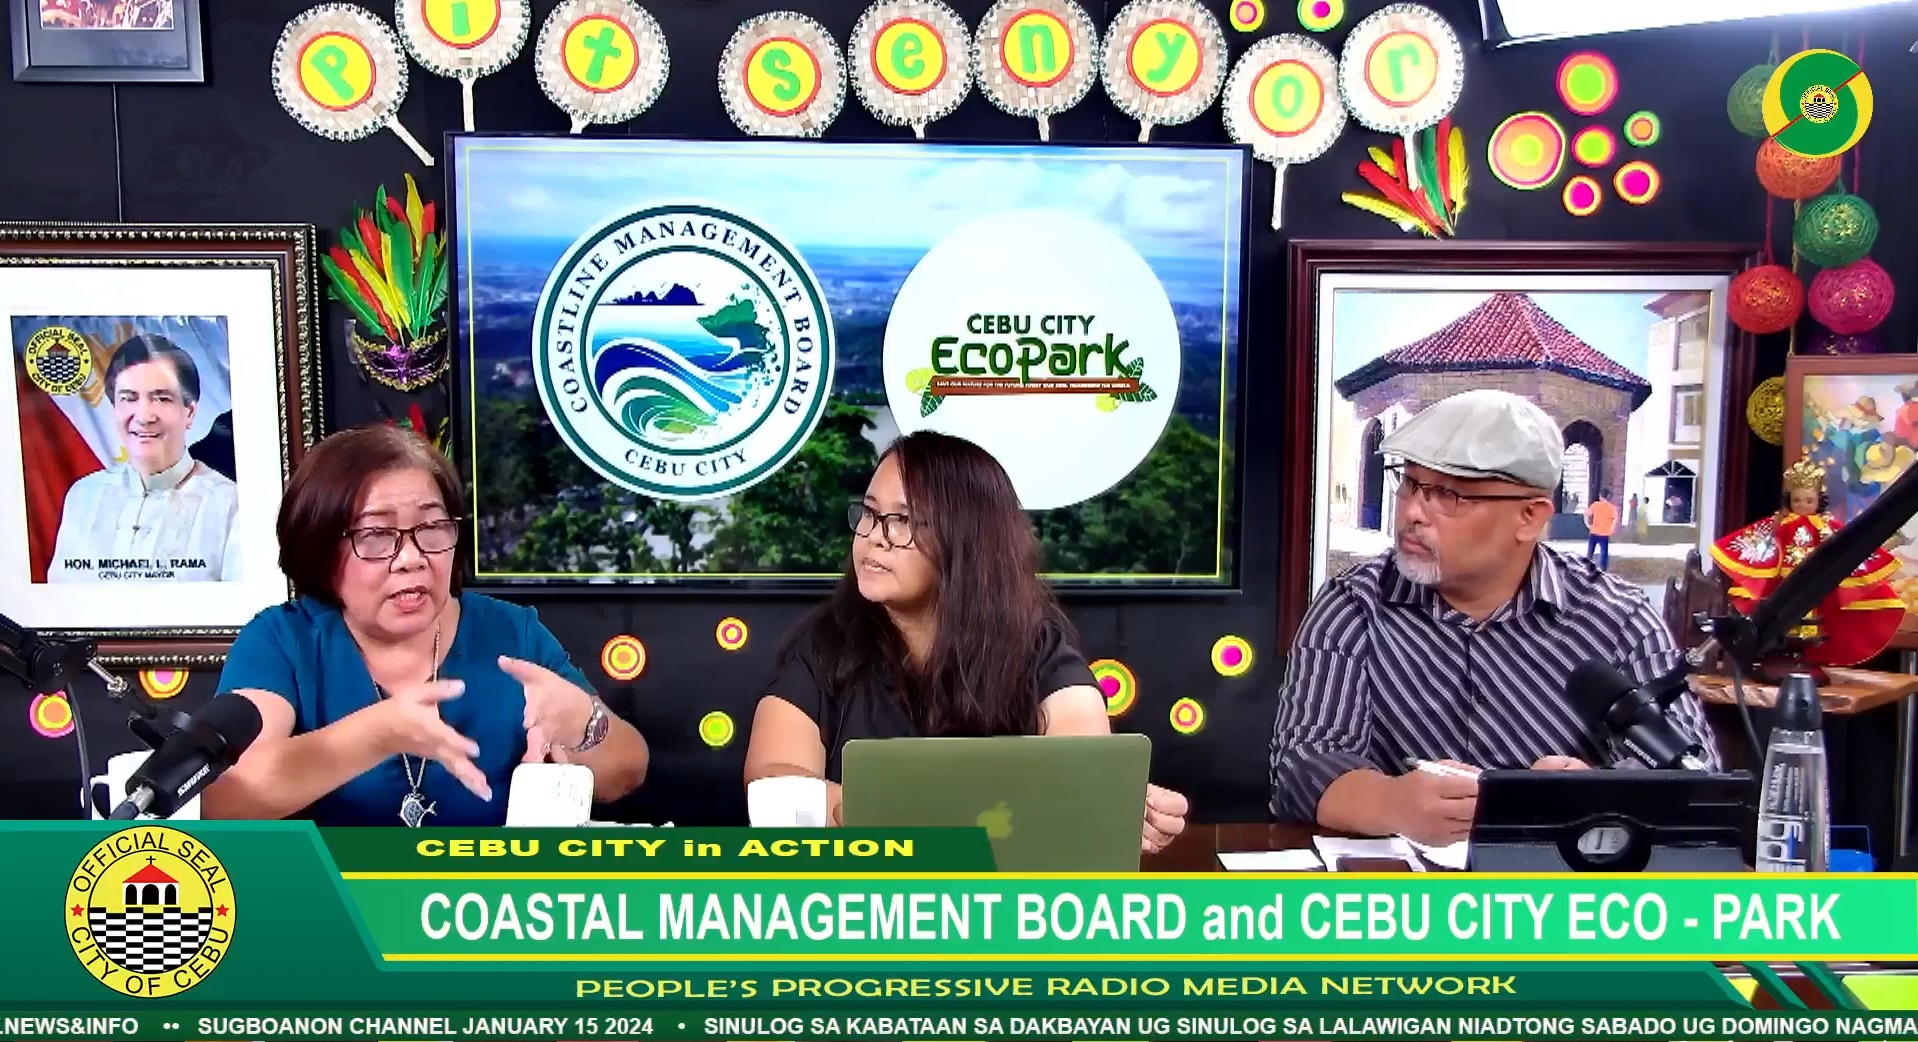 CCEF presented the Mangrove Inventory Assessment Results in barangays of Cogon Pardo and Inayawan, Cebu City